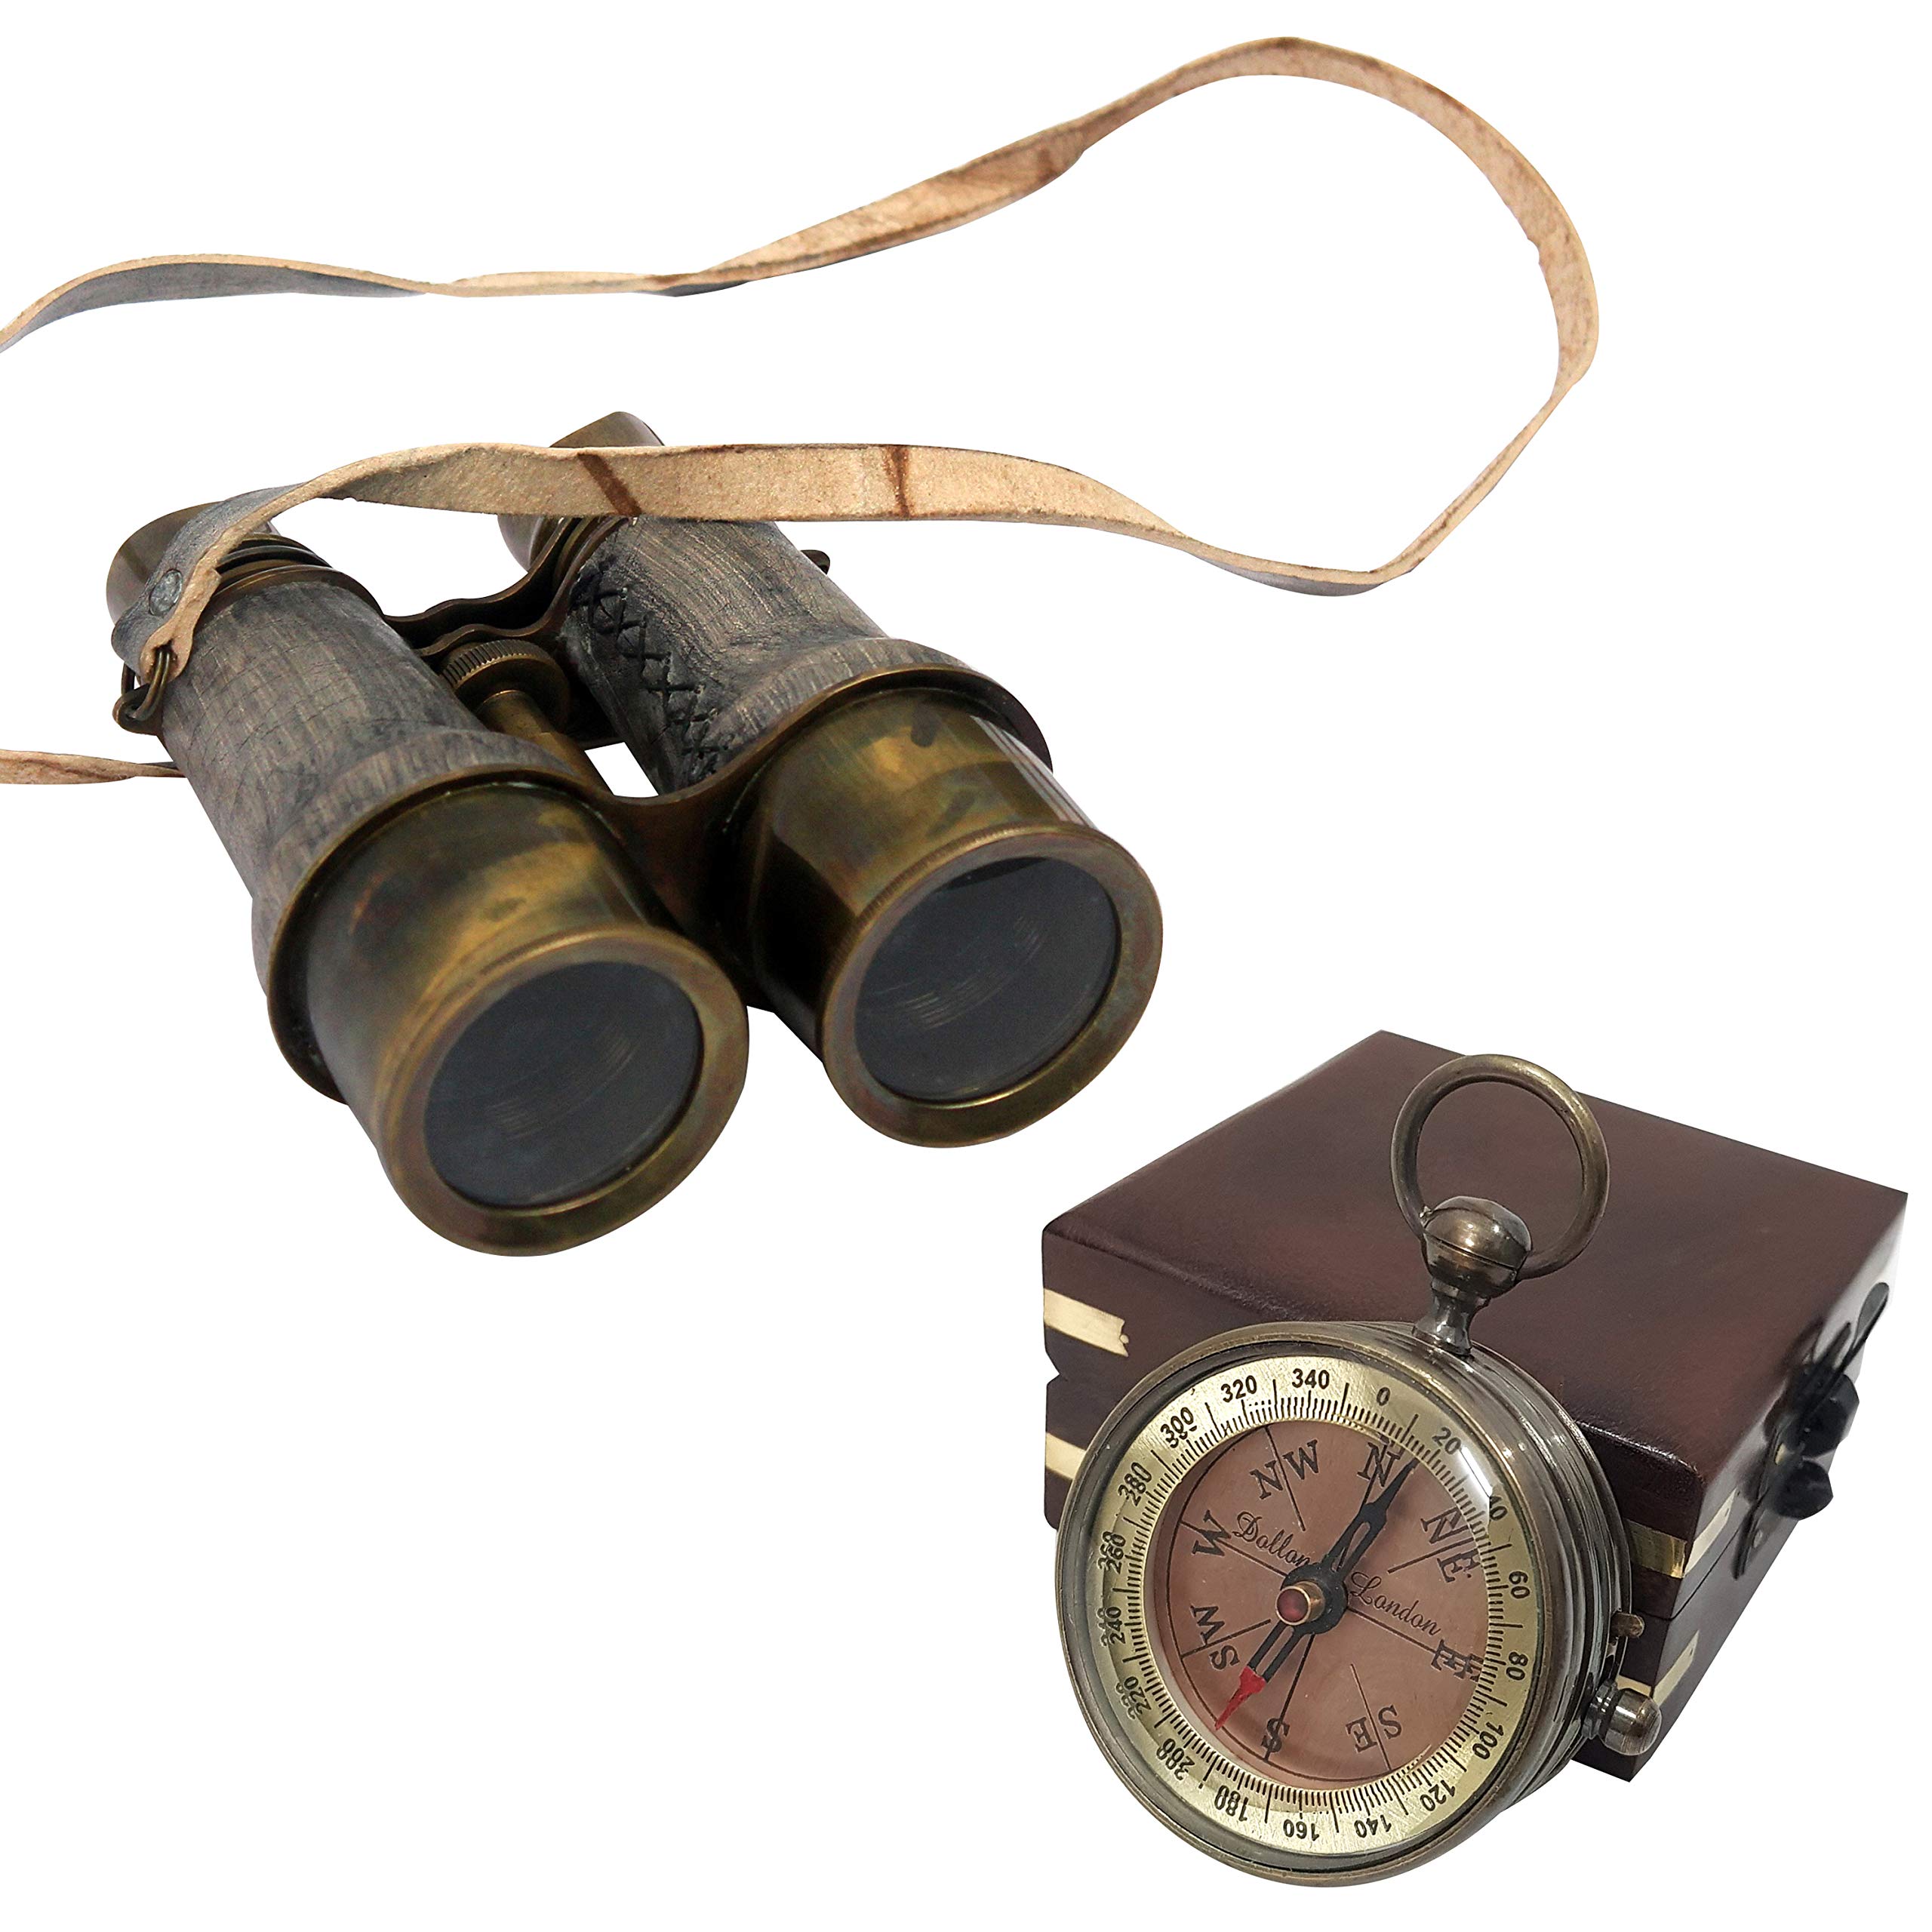 collectiblesBuy Vintage Maritime Leather Victorian Nautical Binocular with Antique Brass Compass with Box Combo